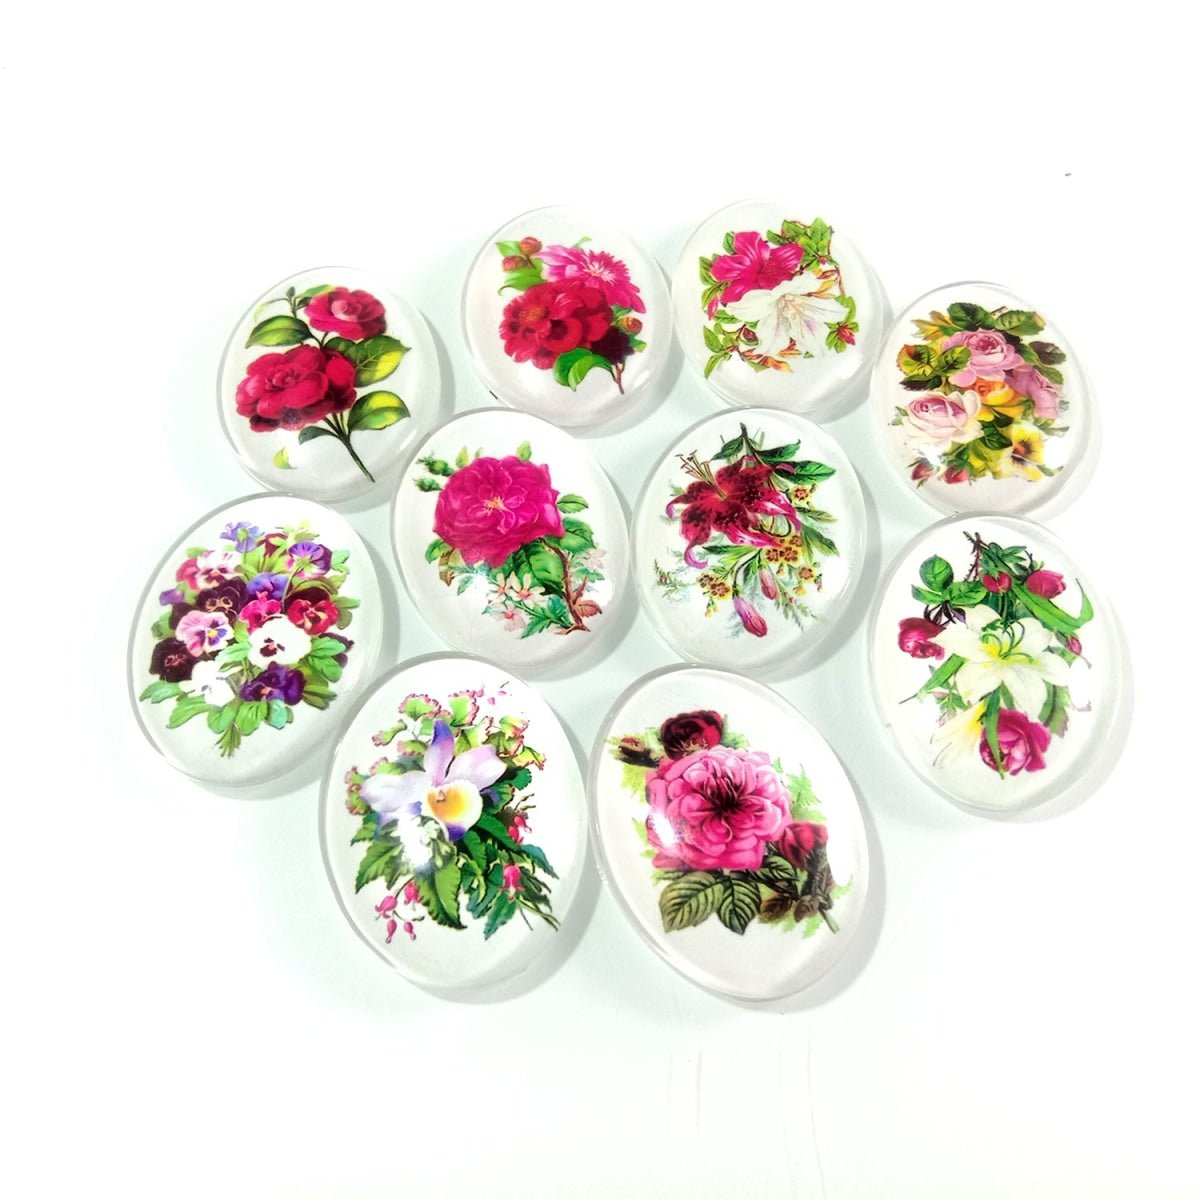 10pcs 13x18mm/18x25mm/30x40mm Oval Photo Glass Cabochon Vintage Flowers Rose Daisy Flat Back - 13x18mm White - - Asia Sell